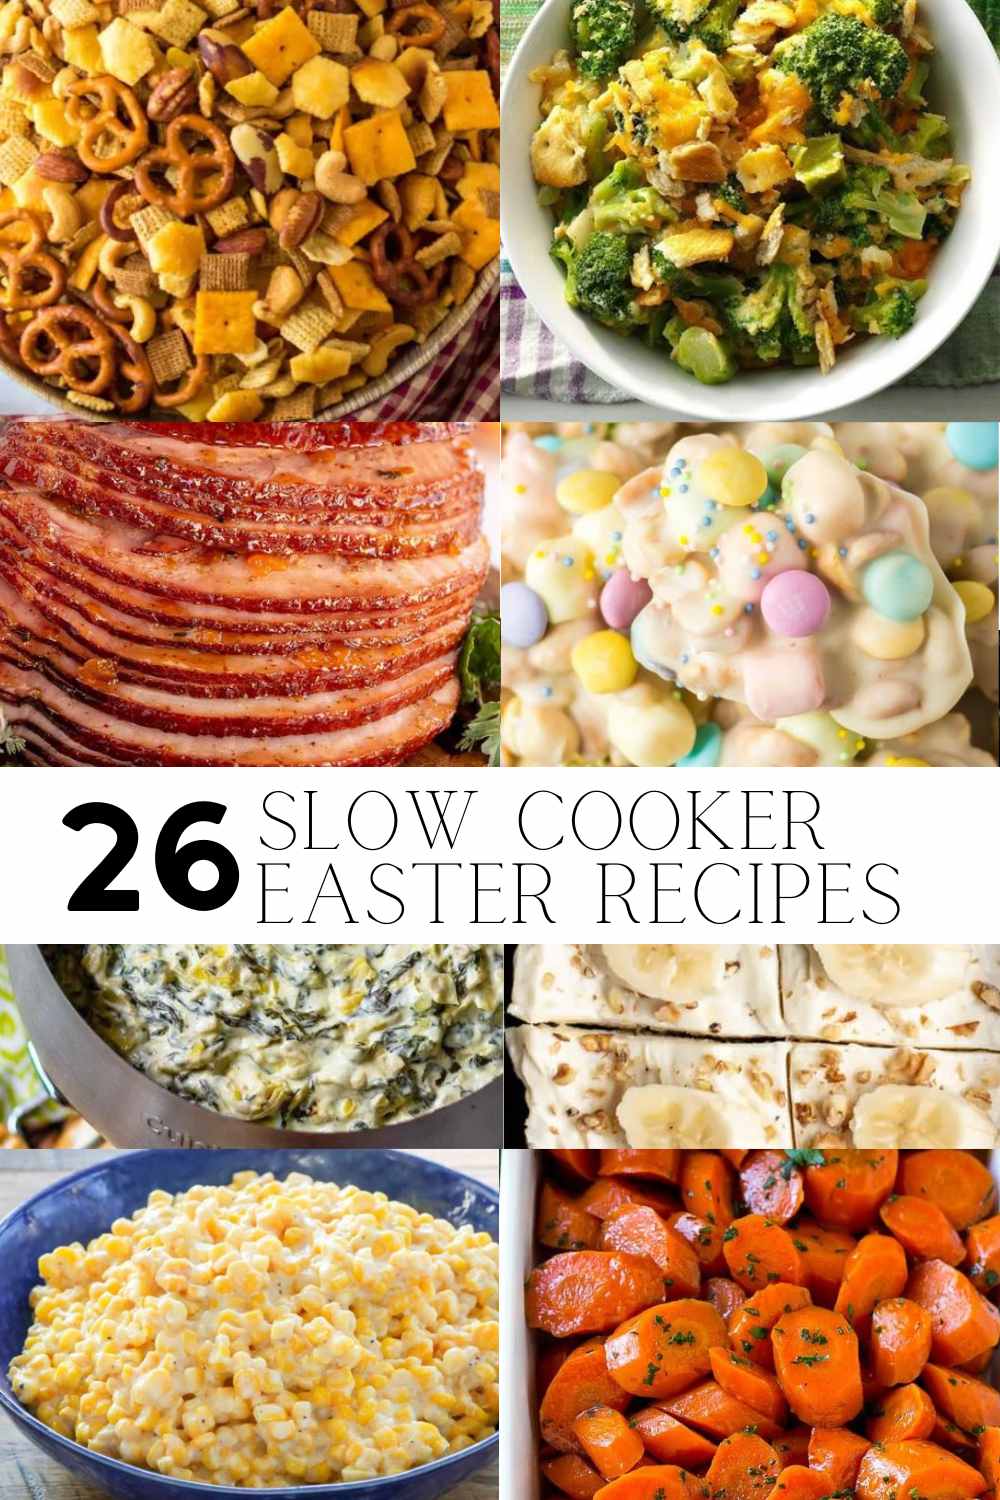 Make some room in the oven with these slow cooker Easter recipes! This recipe list includes appetizer, entrees, sides, and even a few desserts.